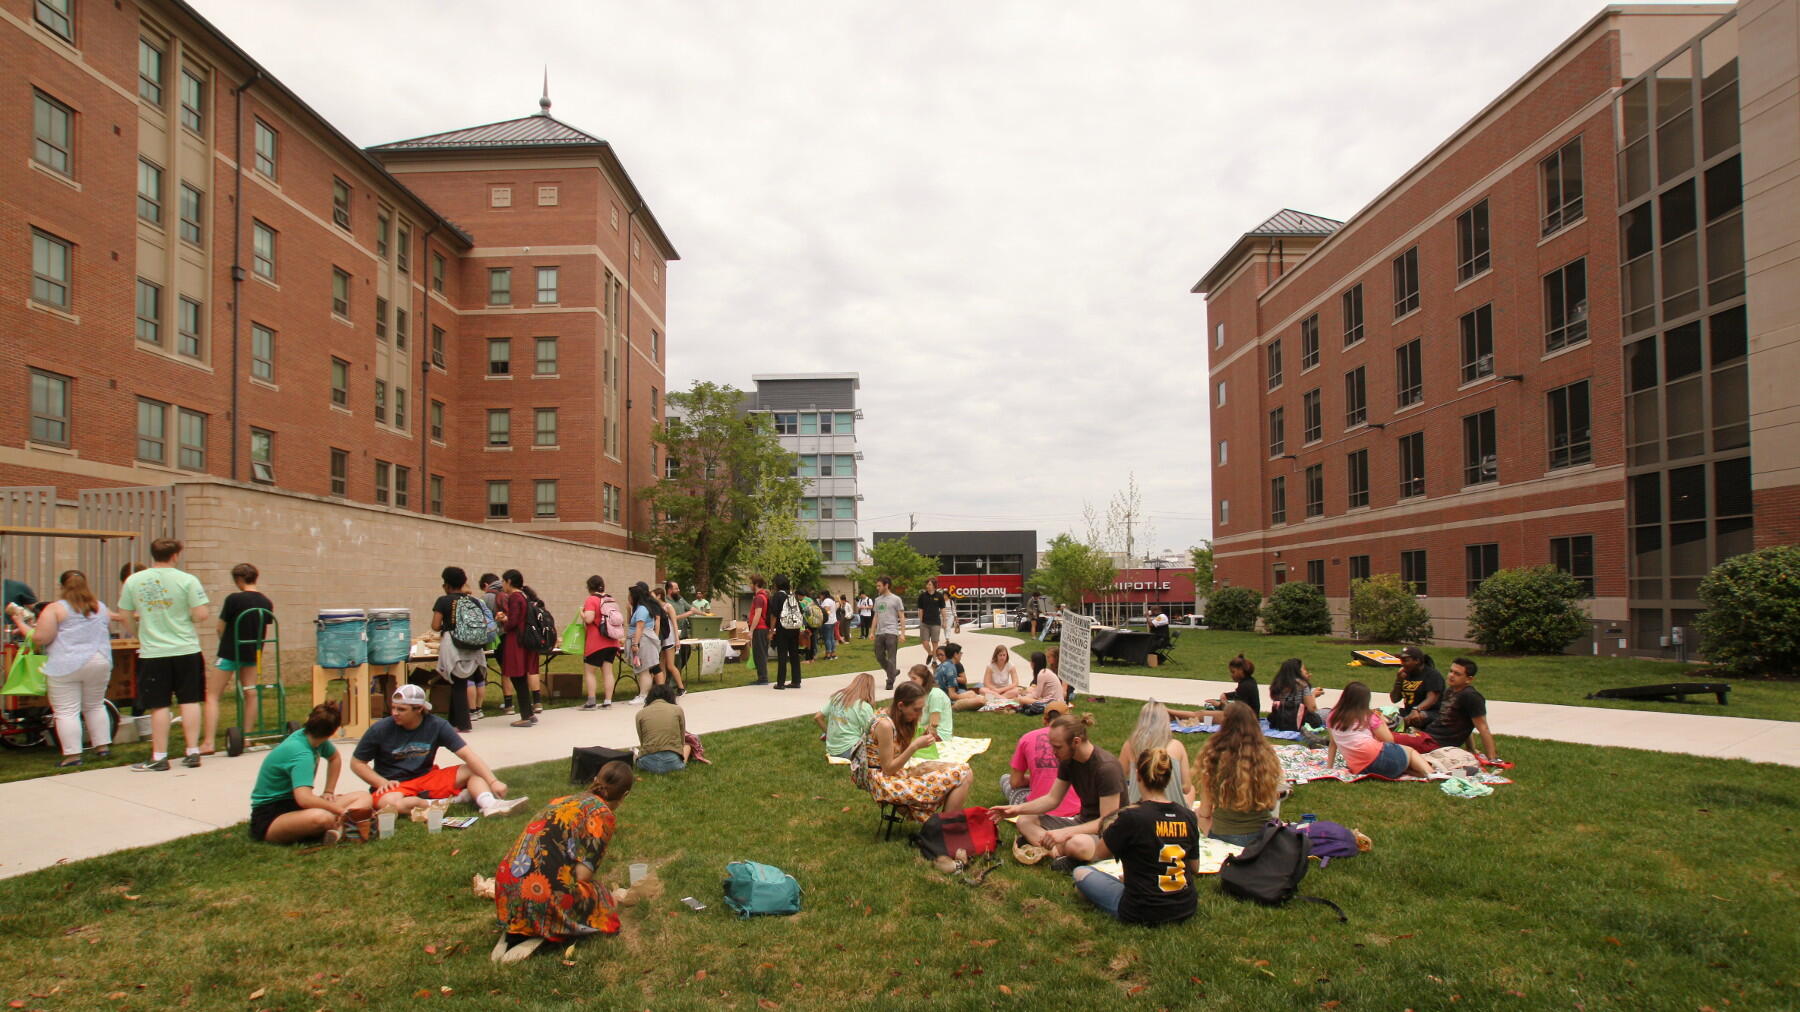 The 2017 Earth Day picnic on VCU's Monroe Park Campus. (File photo)